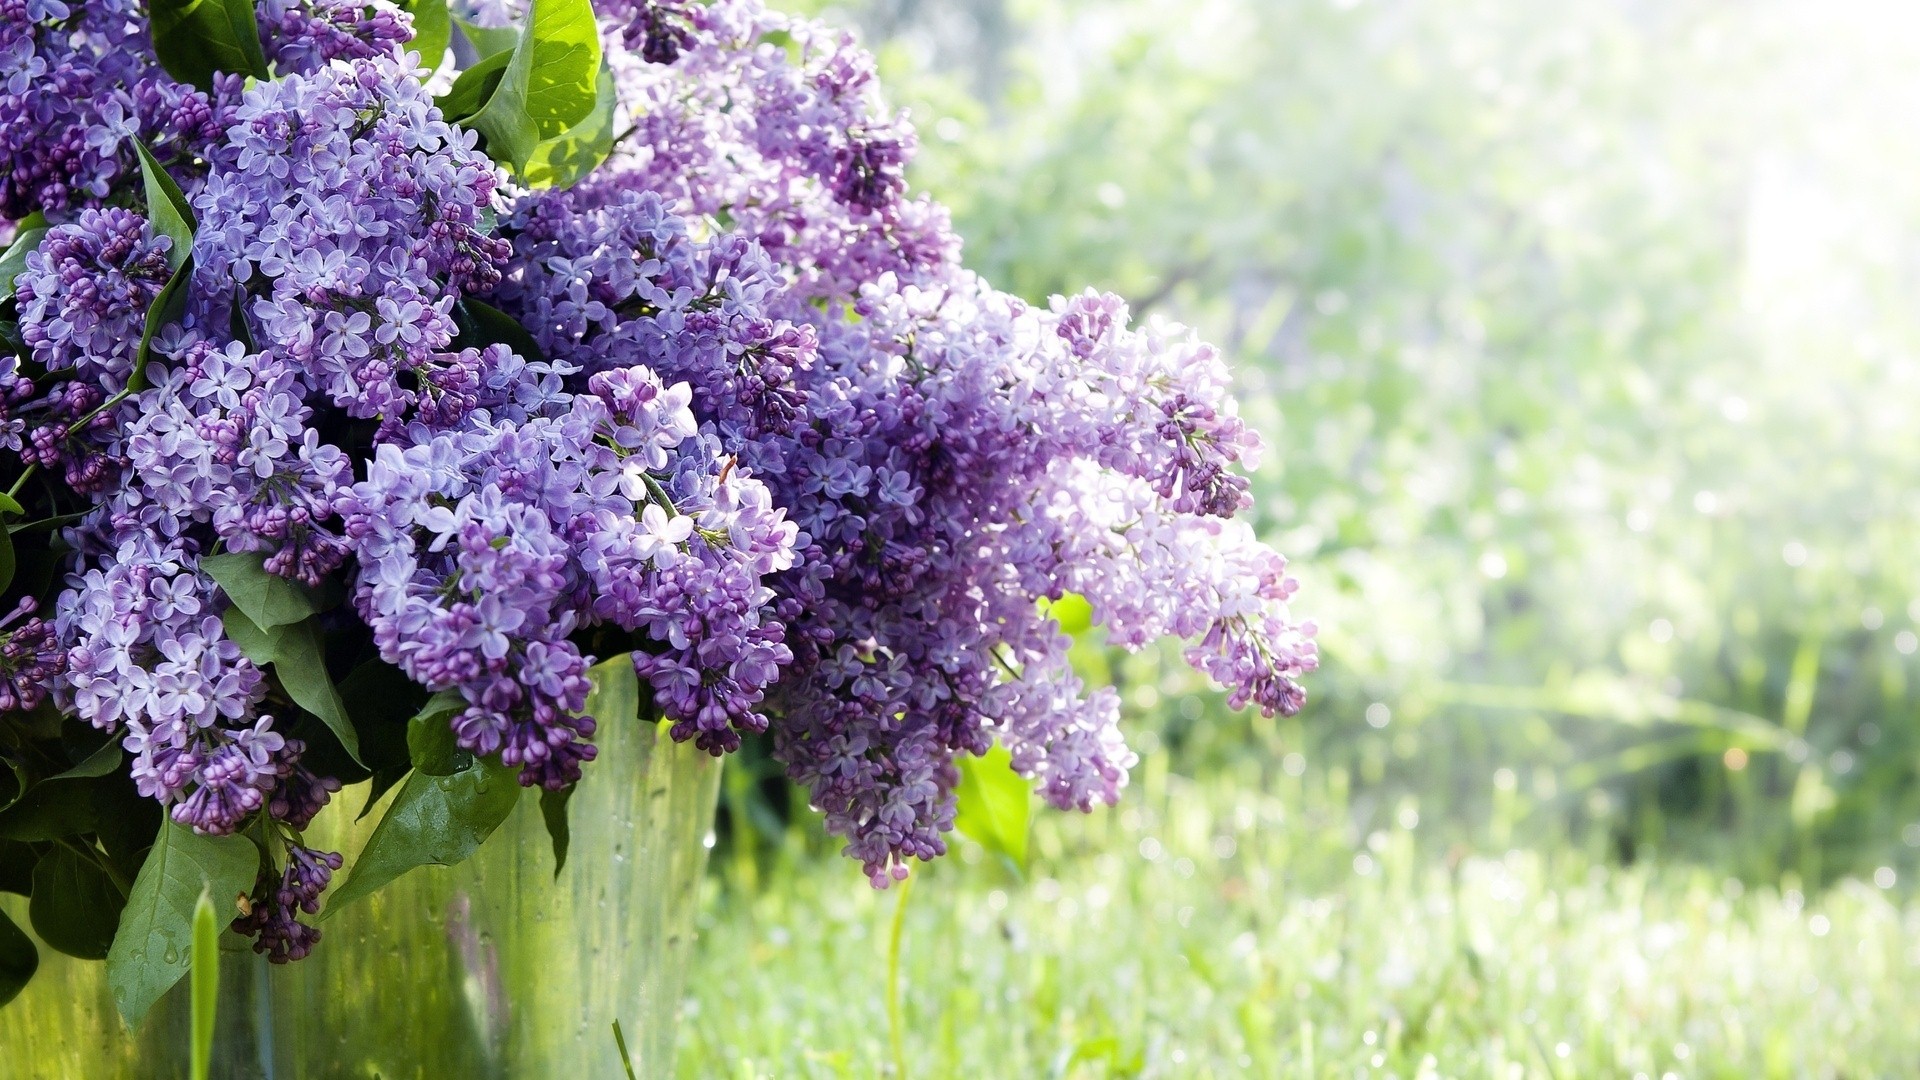  03 2014 category flowers downloads 7720 tags lilac flowers views 15933